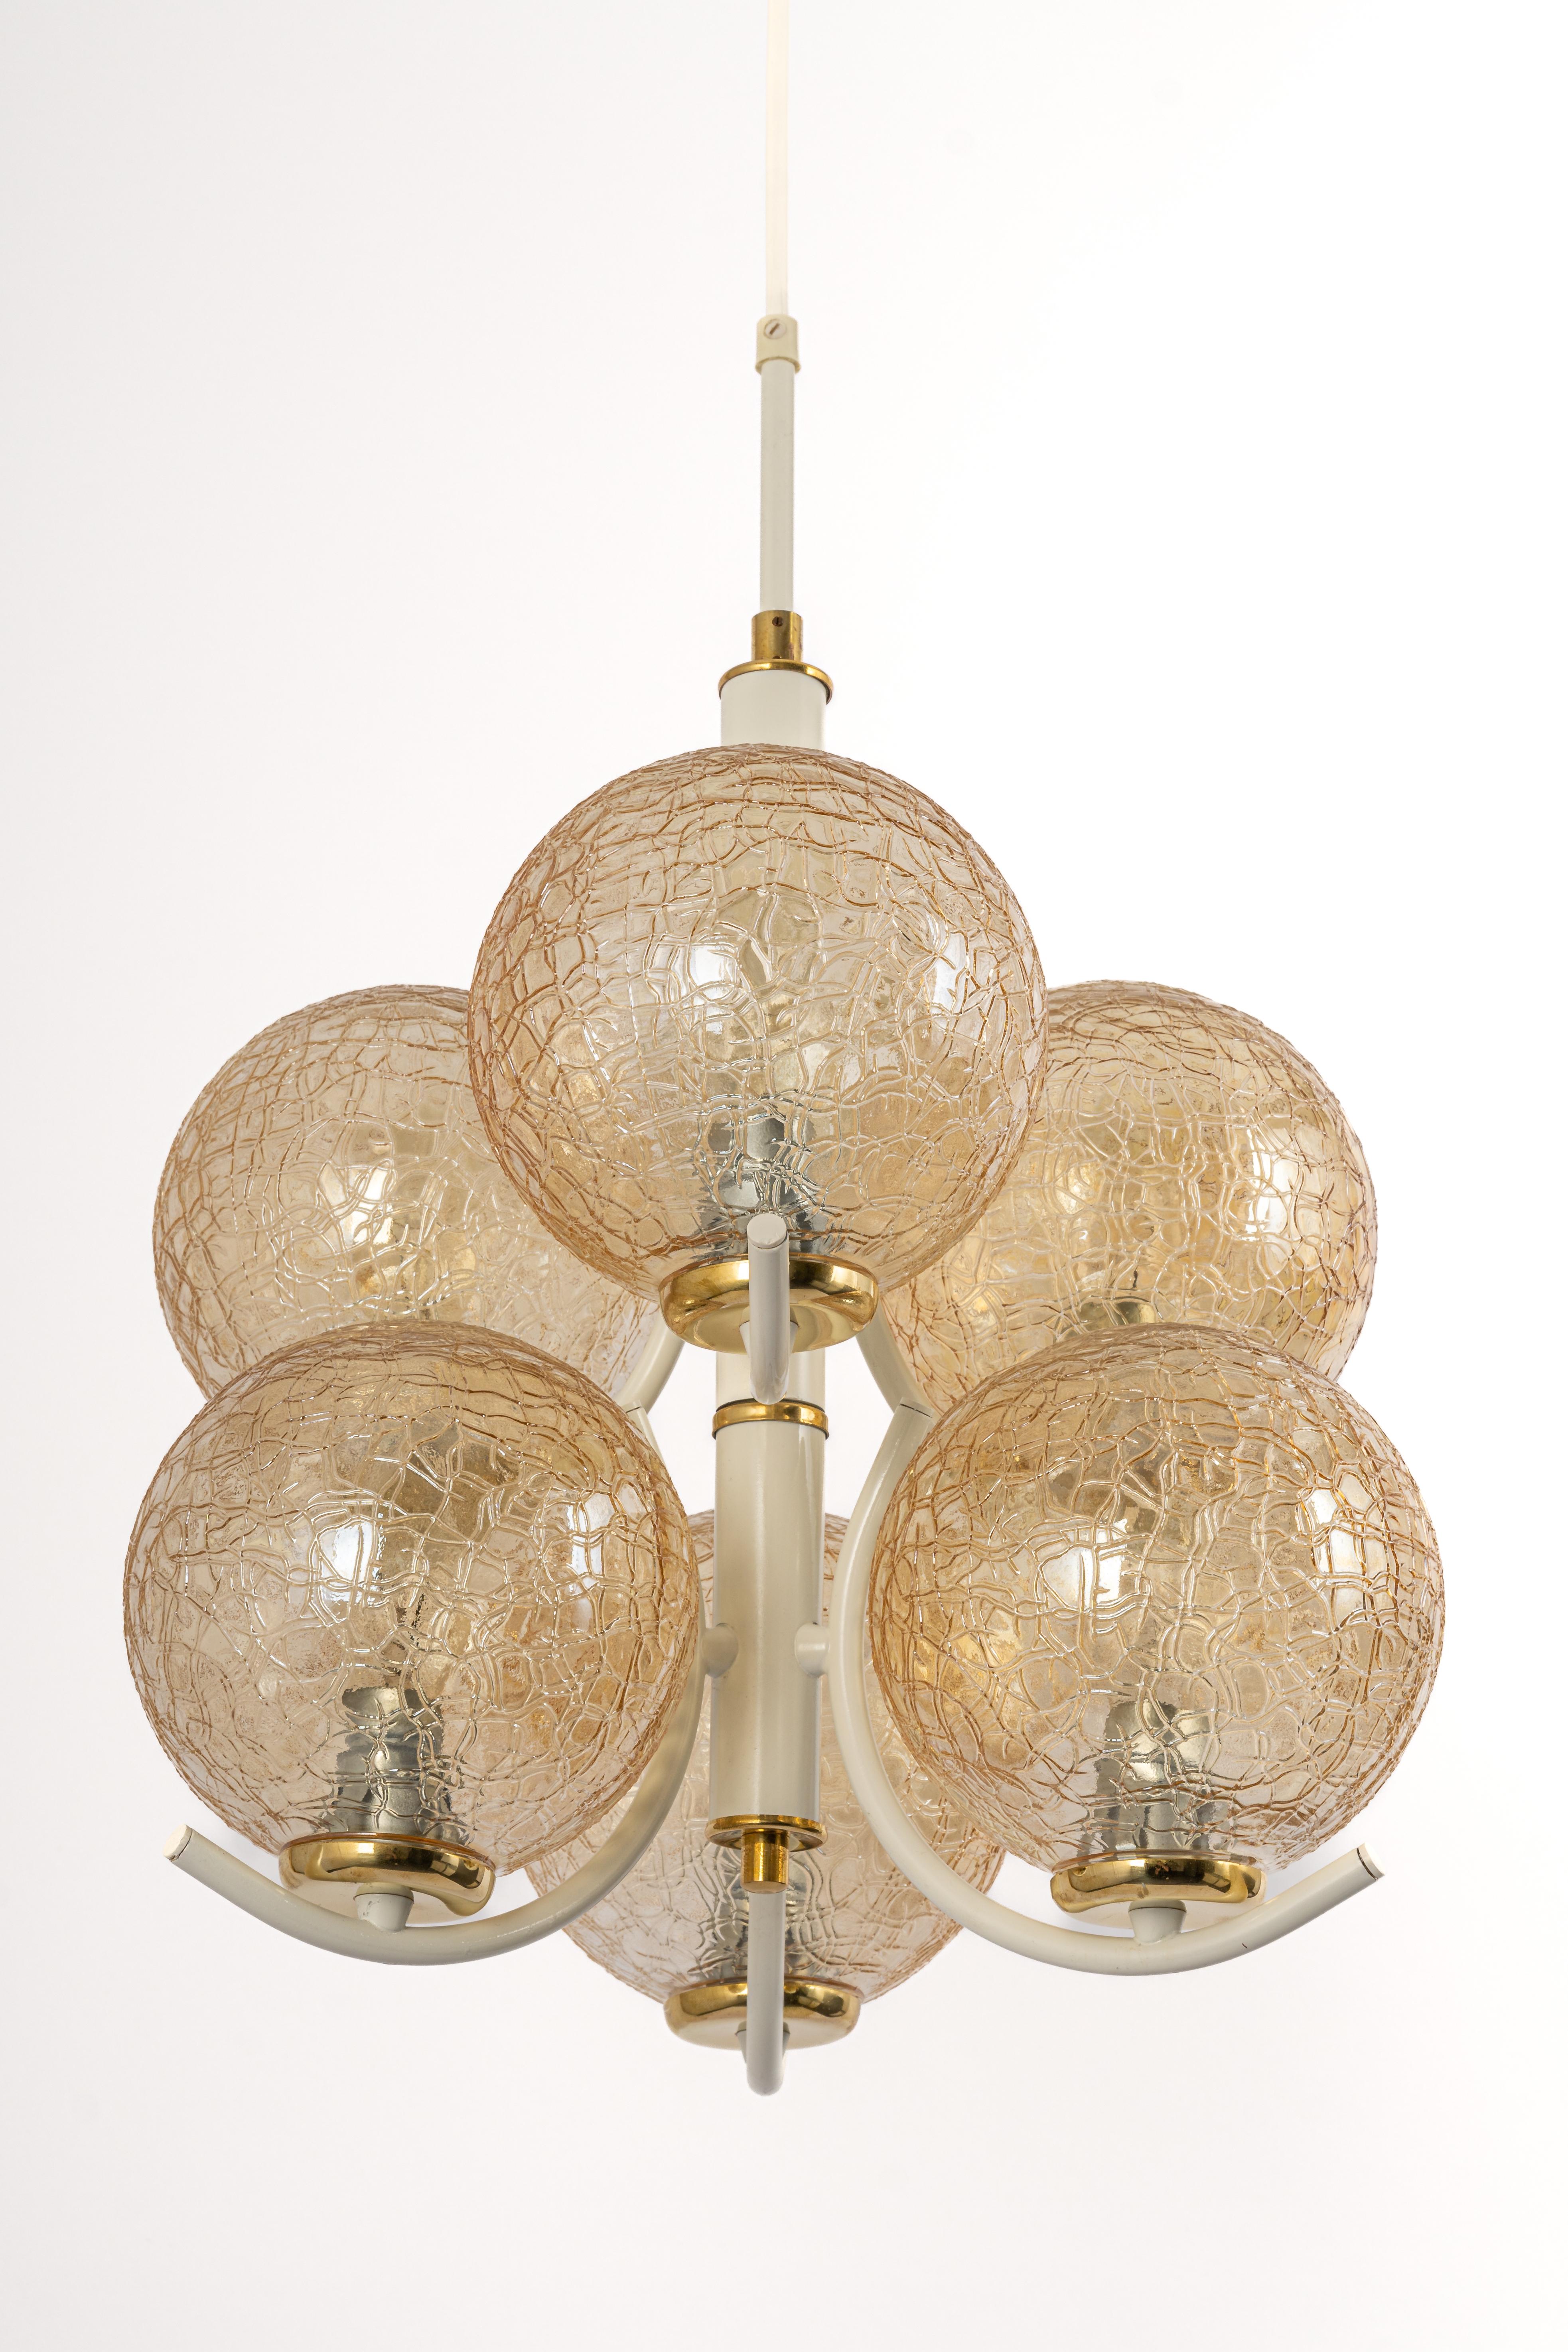 Stunning 6-arm Sputnik chandelier with 6 glass shades by Richard Essig, Germany, 1960s

It needs6 candelabra size bulbs up to 40 watts each.Light bulbs are not included. It is possible to install this fixture in all countries (US, UK, Europe,